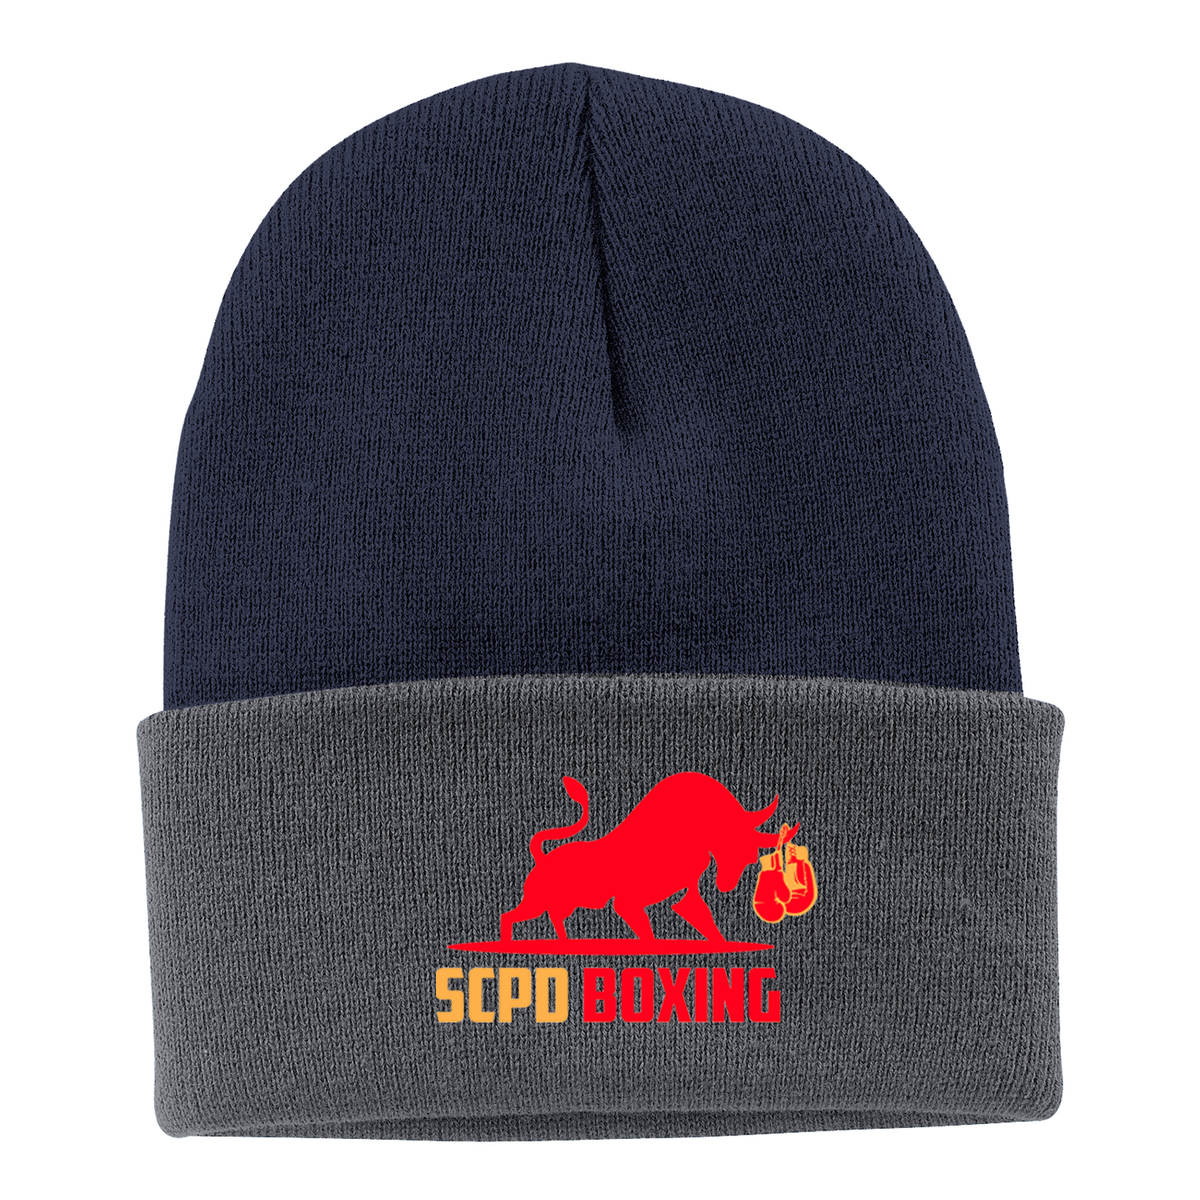 SCPD Boxing Knit Beanie